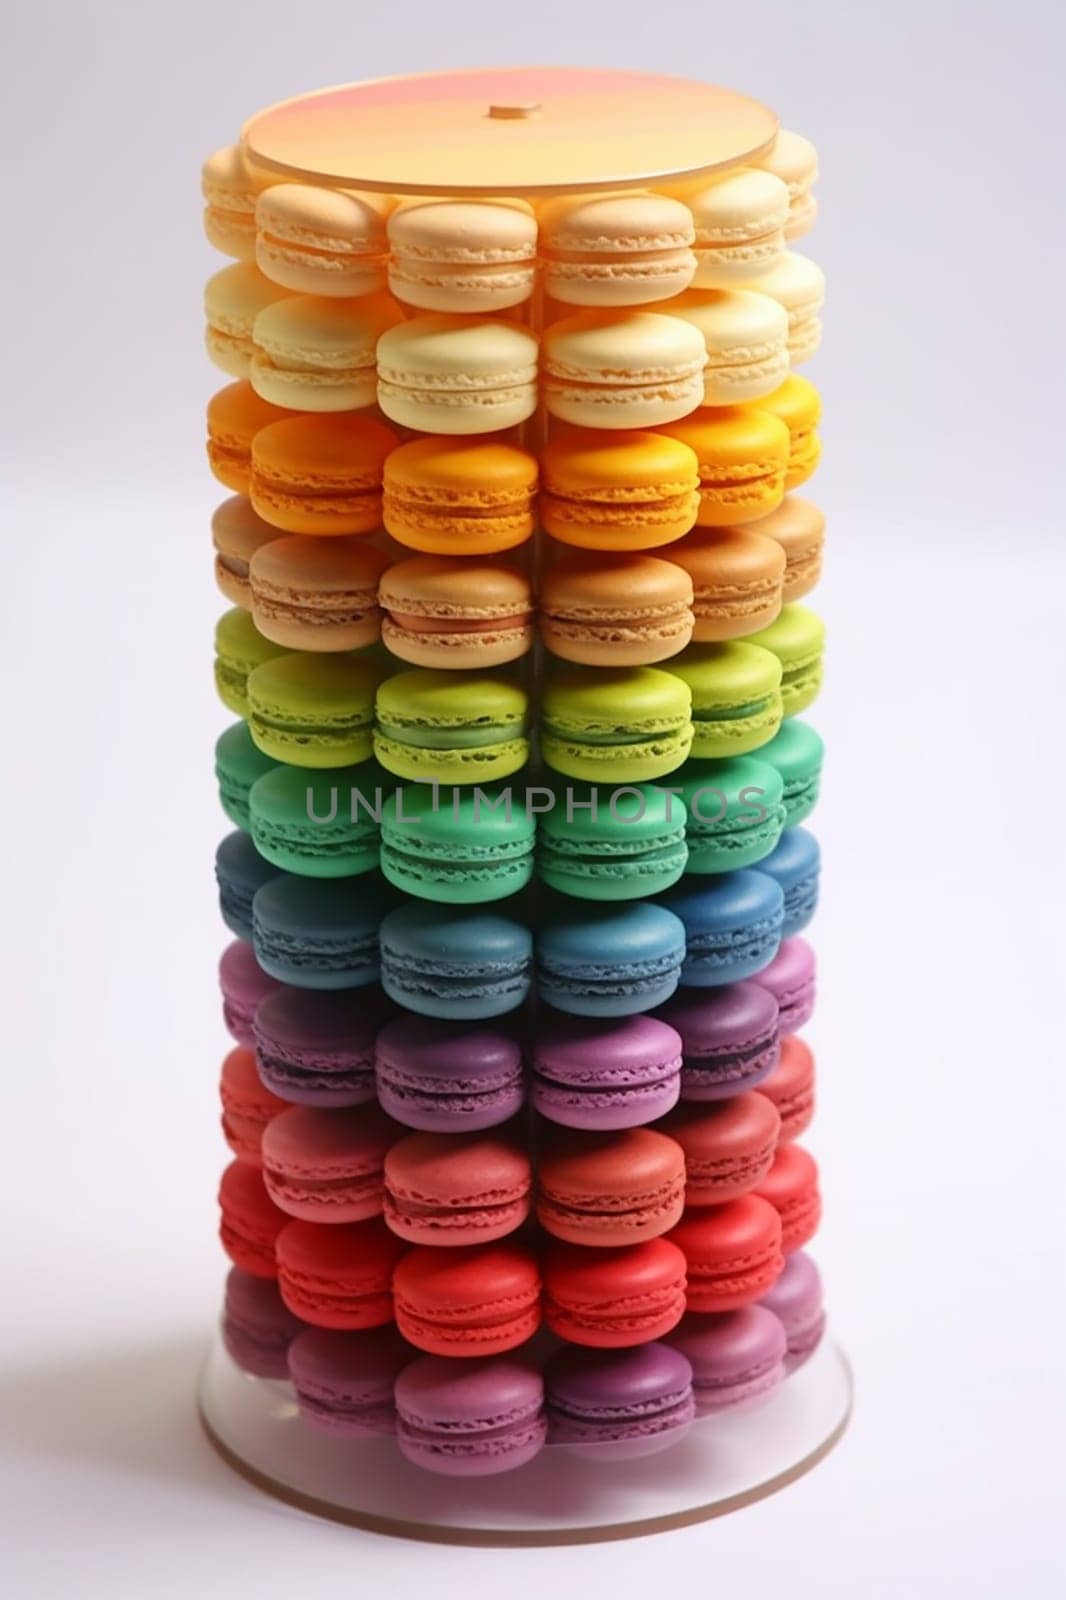 Colorful macarons arranged in a towering stack